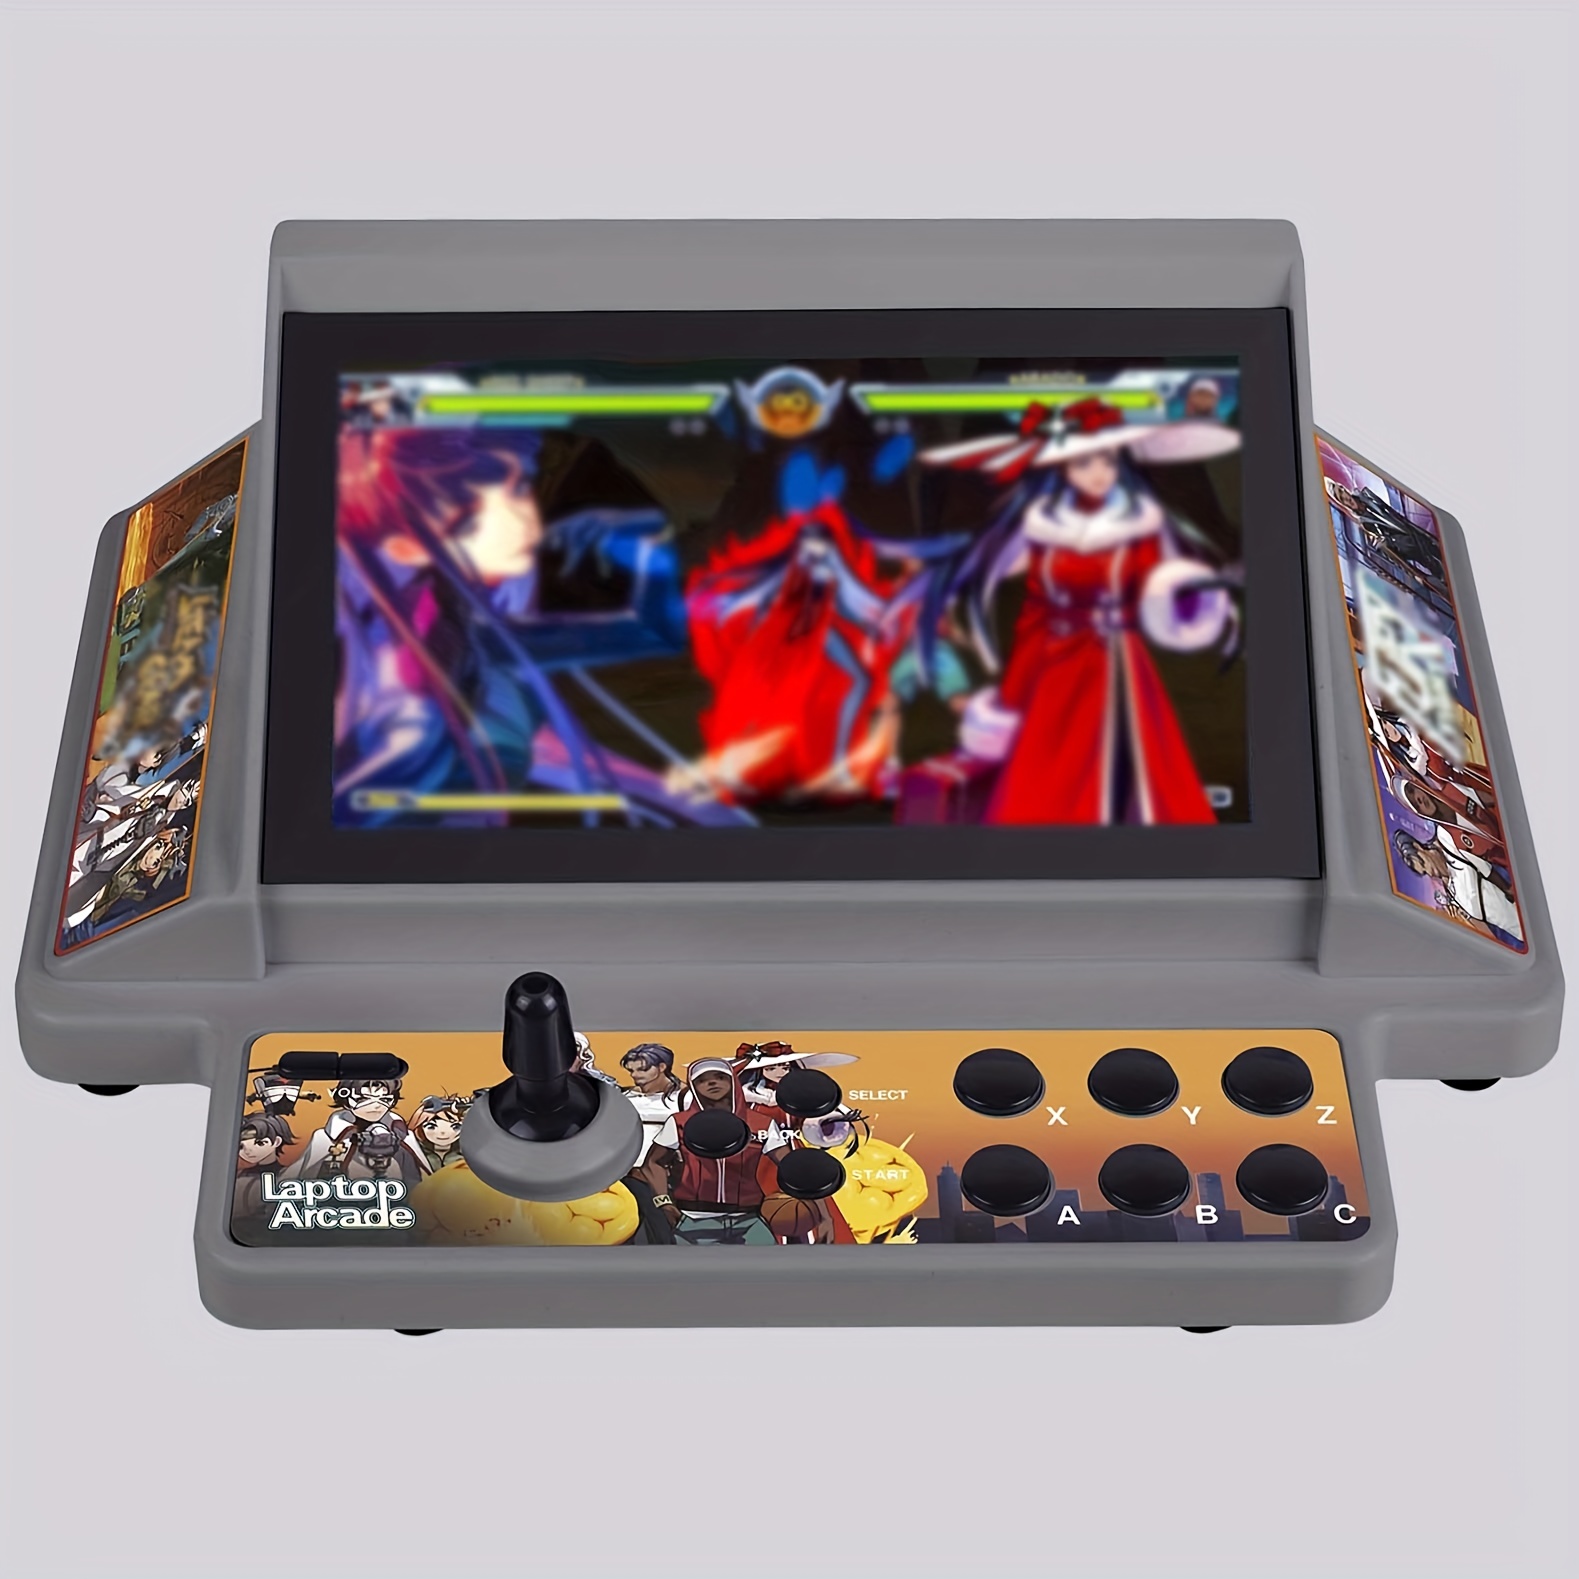 Arcade game two-player controller Immersive arcade game experience – DOYO  Game